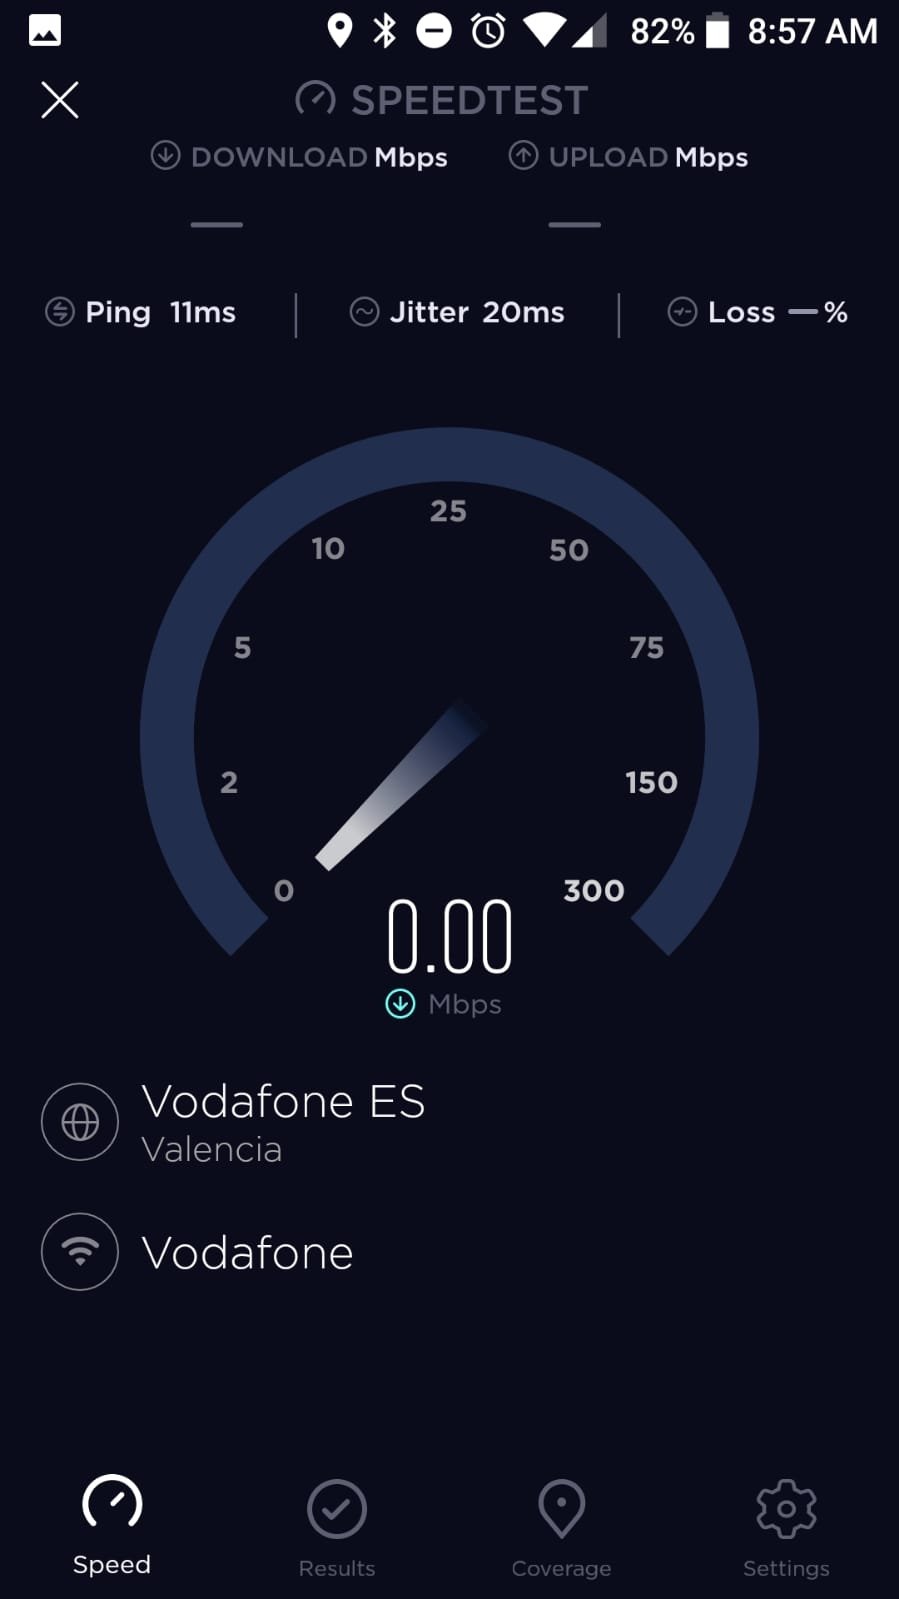 Speedtest by Ookla 4.6.18 - Download for Android APK Free